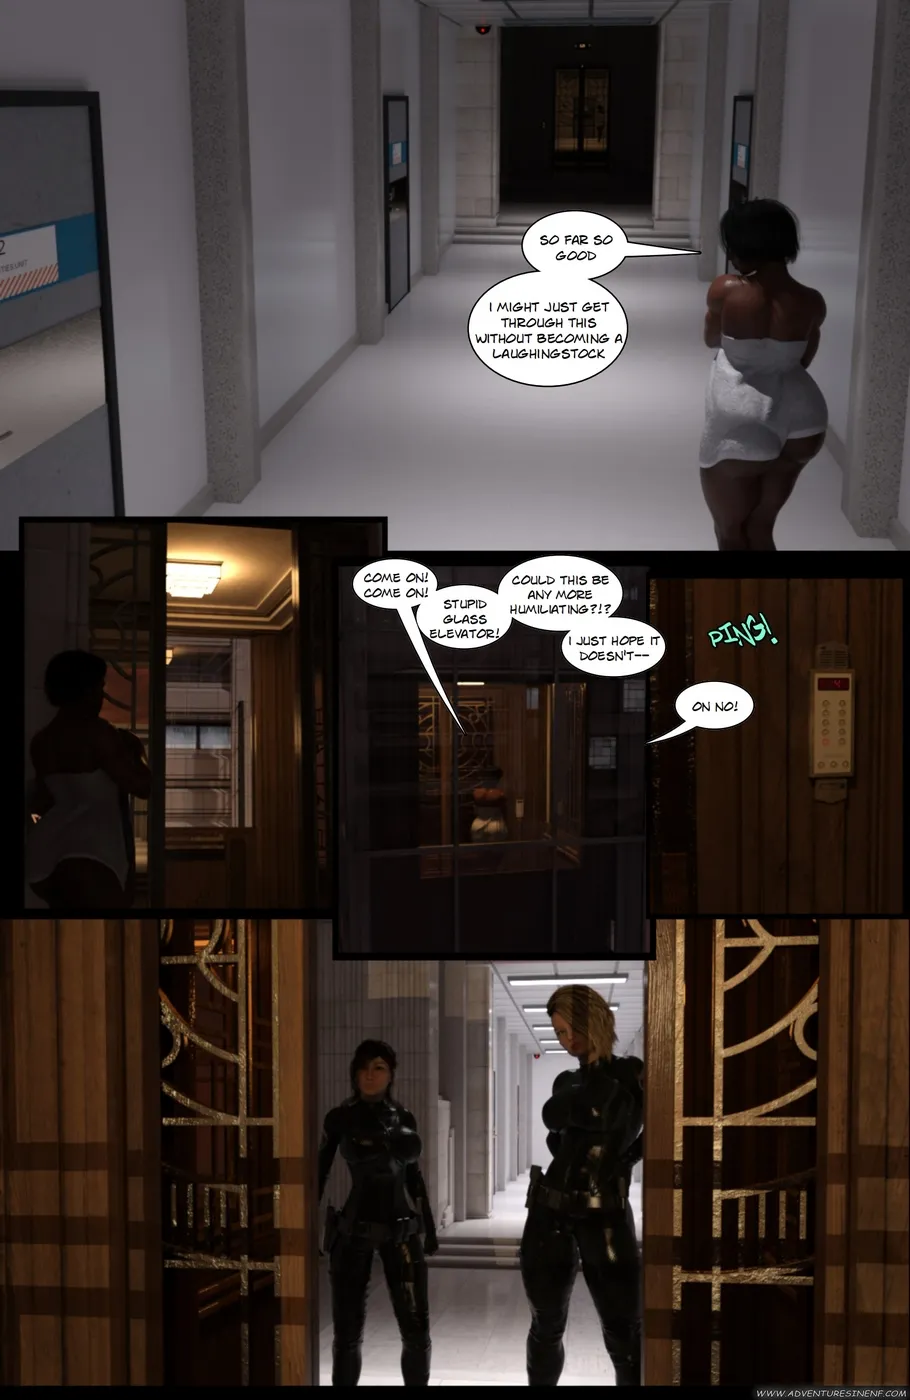 Agents of E.N.F.- The Cephalopod Strikes! - Page 11